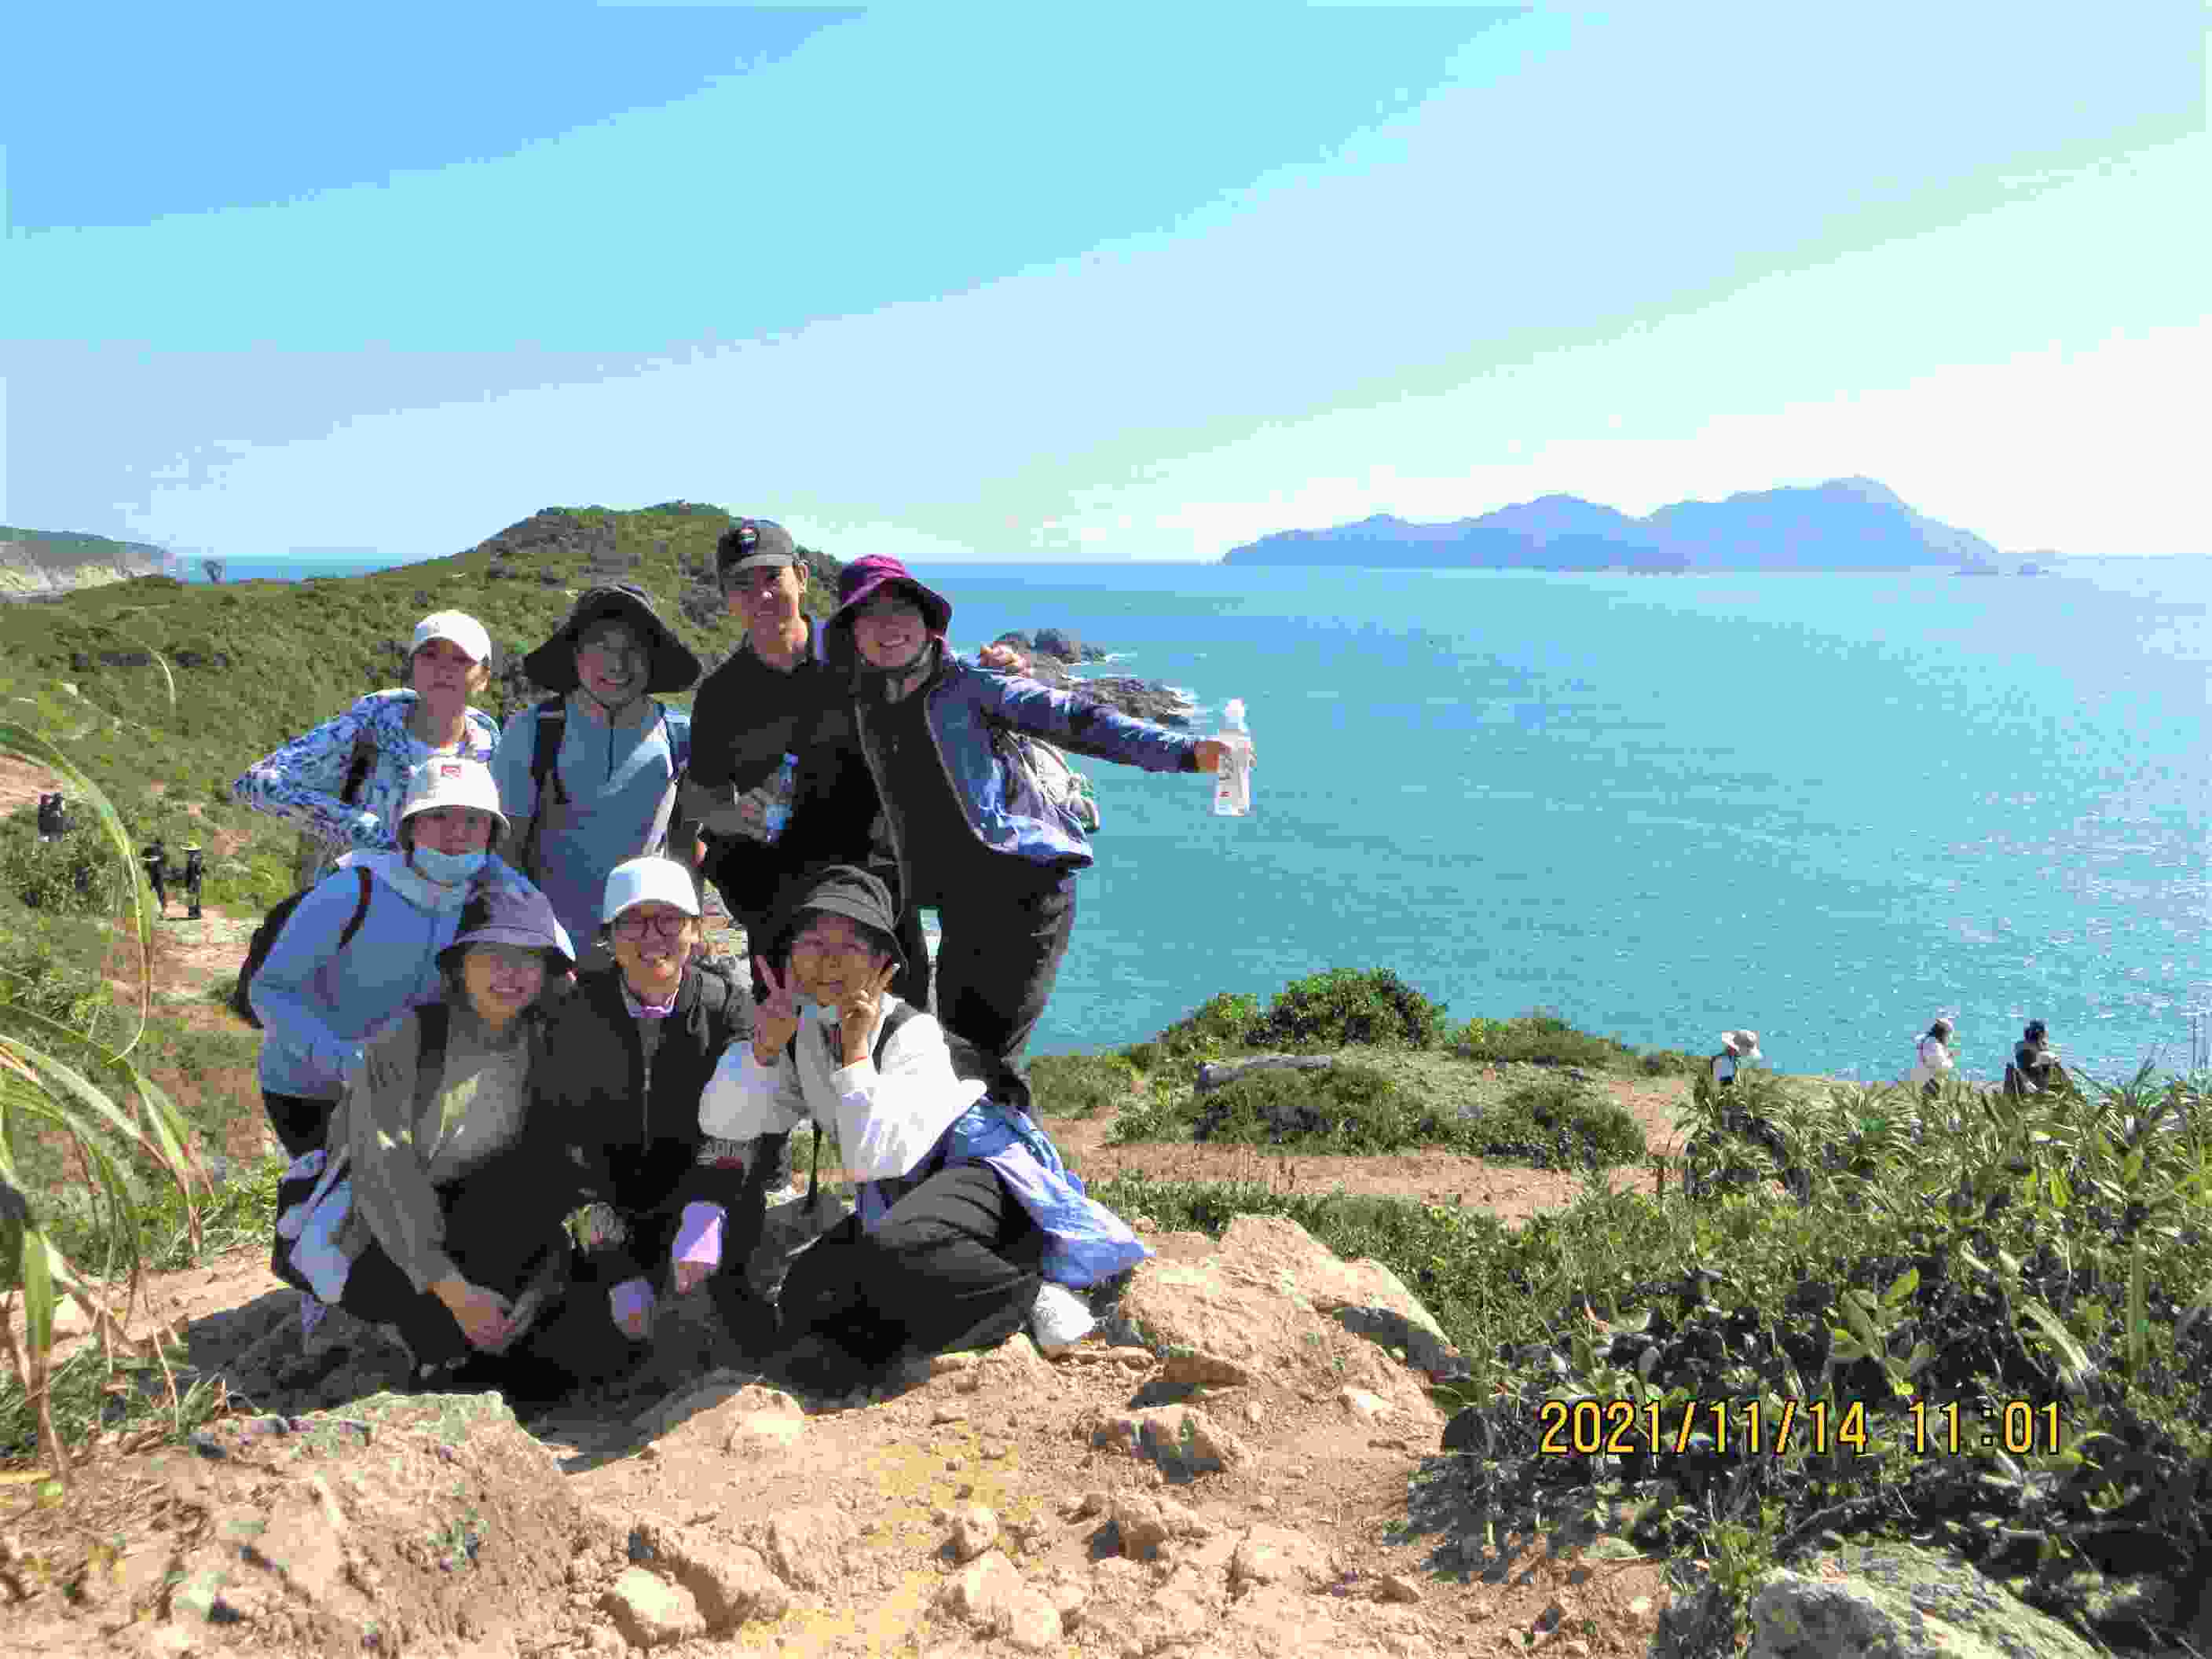 A group of eight people gather happily on an island surrounded by a beautiful sea.